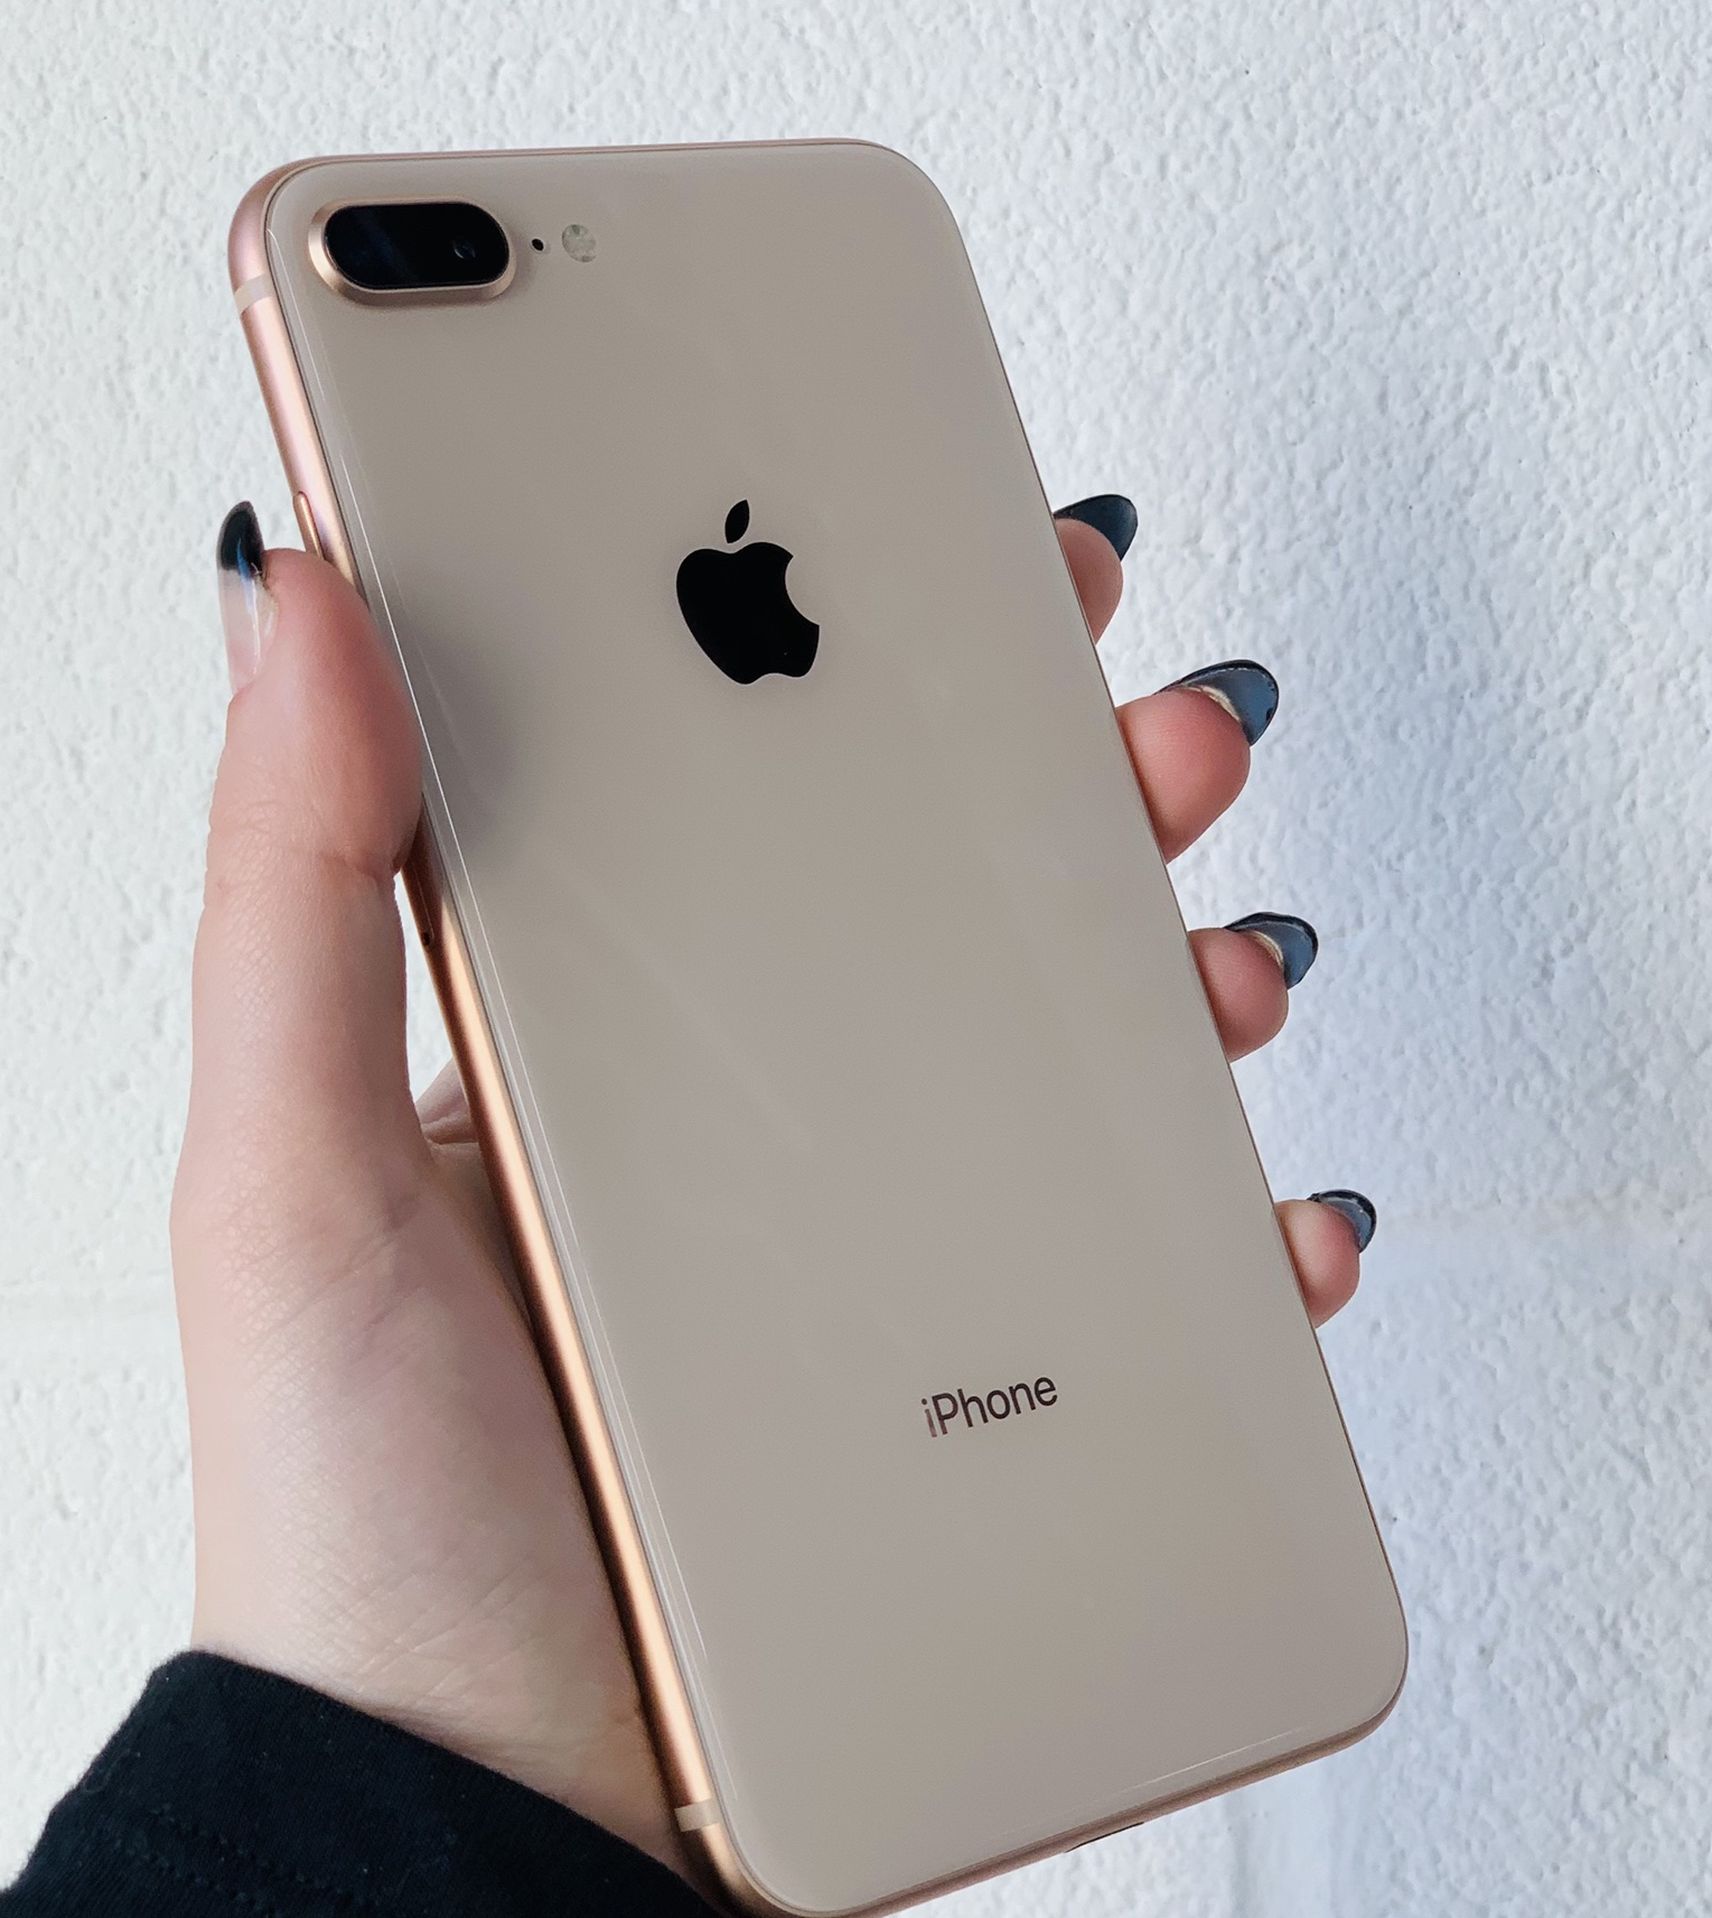 Unlocked iPhone 8 Plus $449(will take payments)